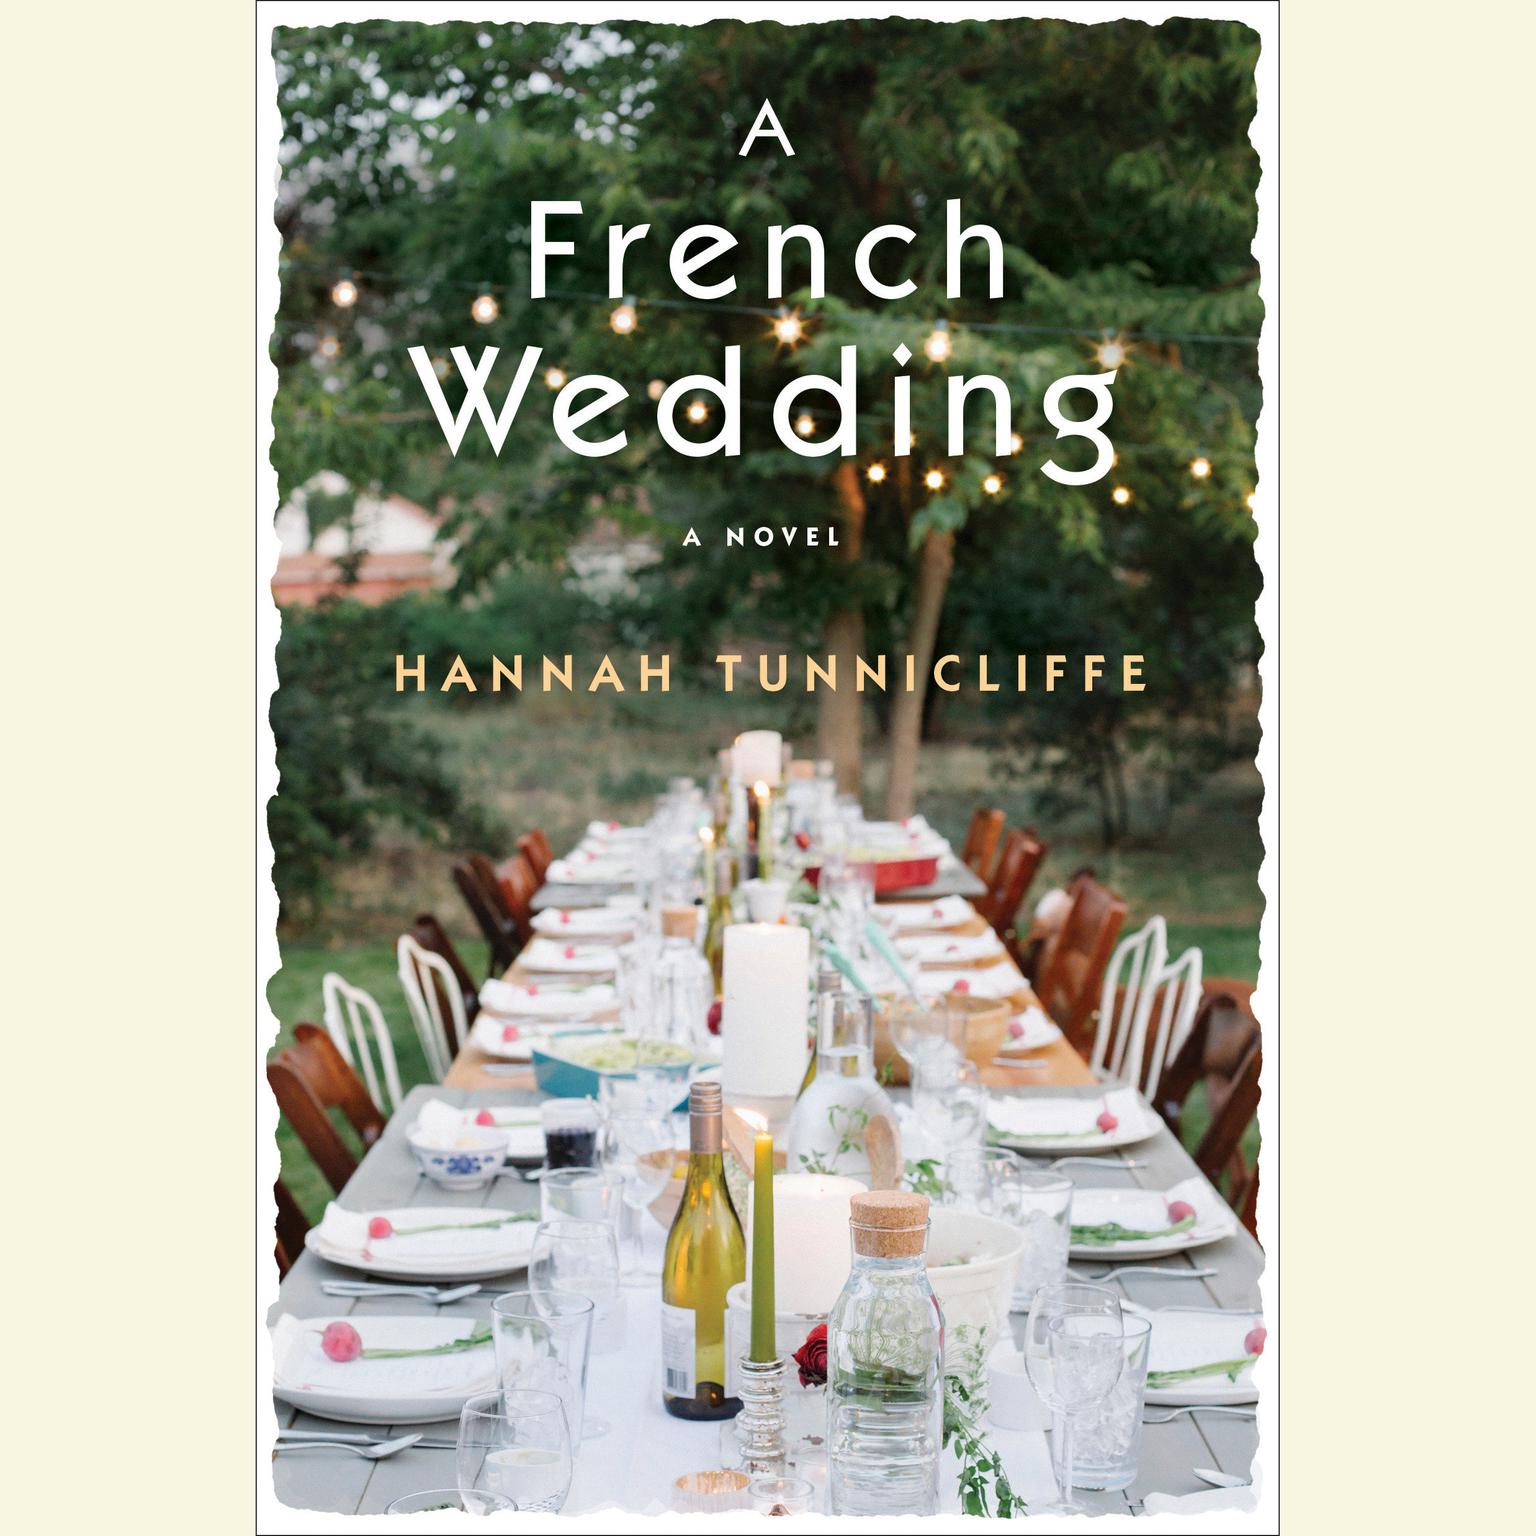 A French Wedding: A Novel Audiobook, by Hannah Tunnicliffe